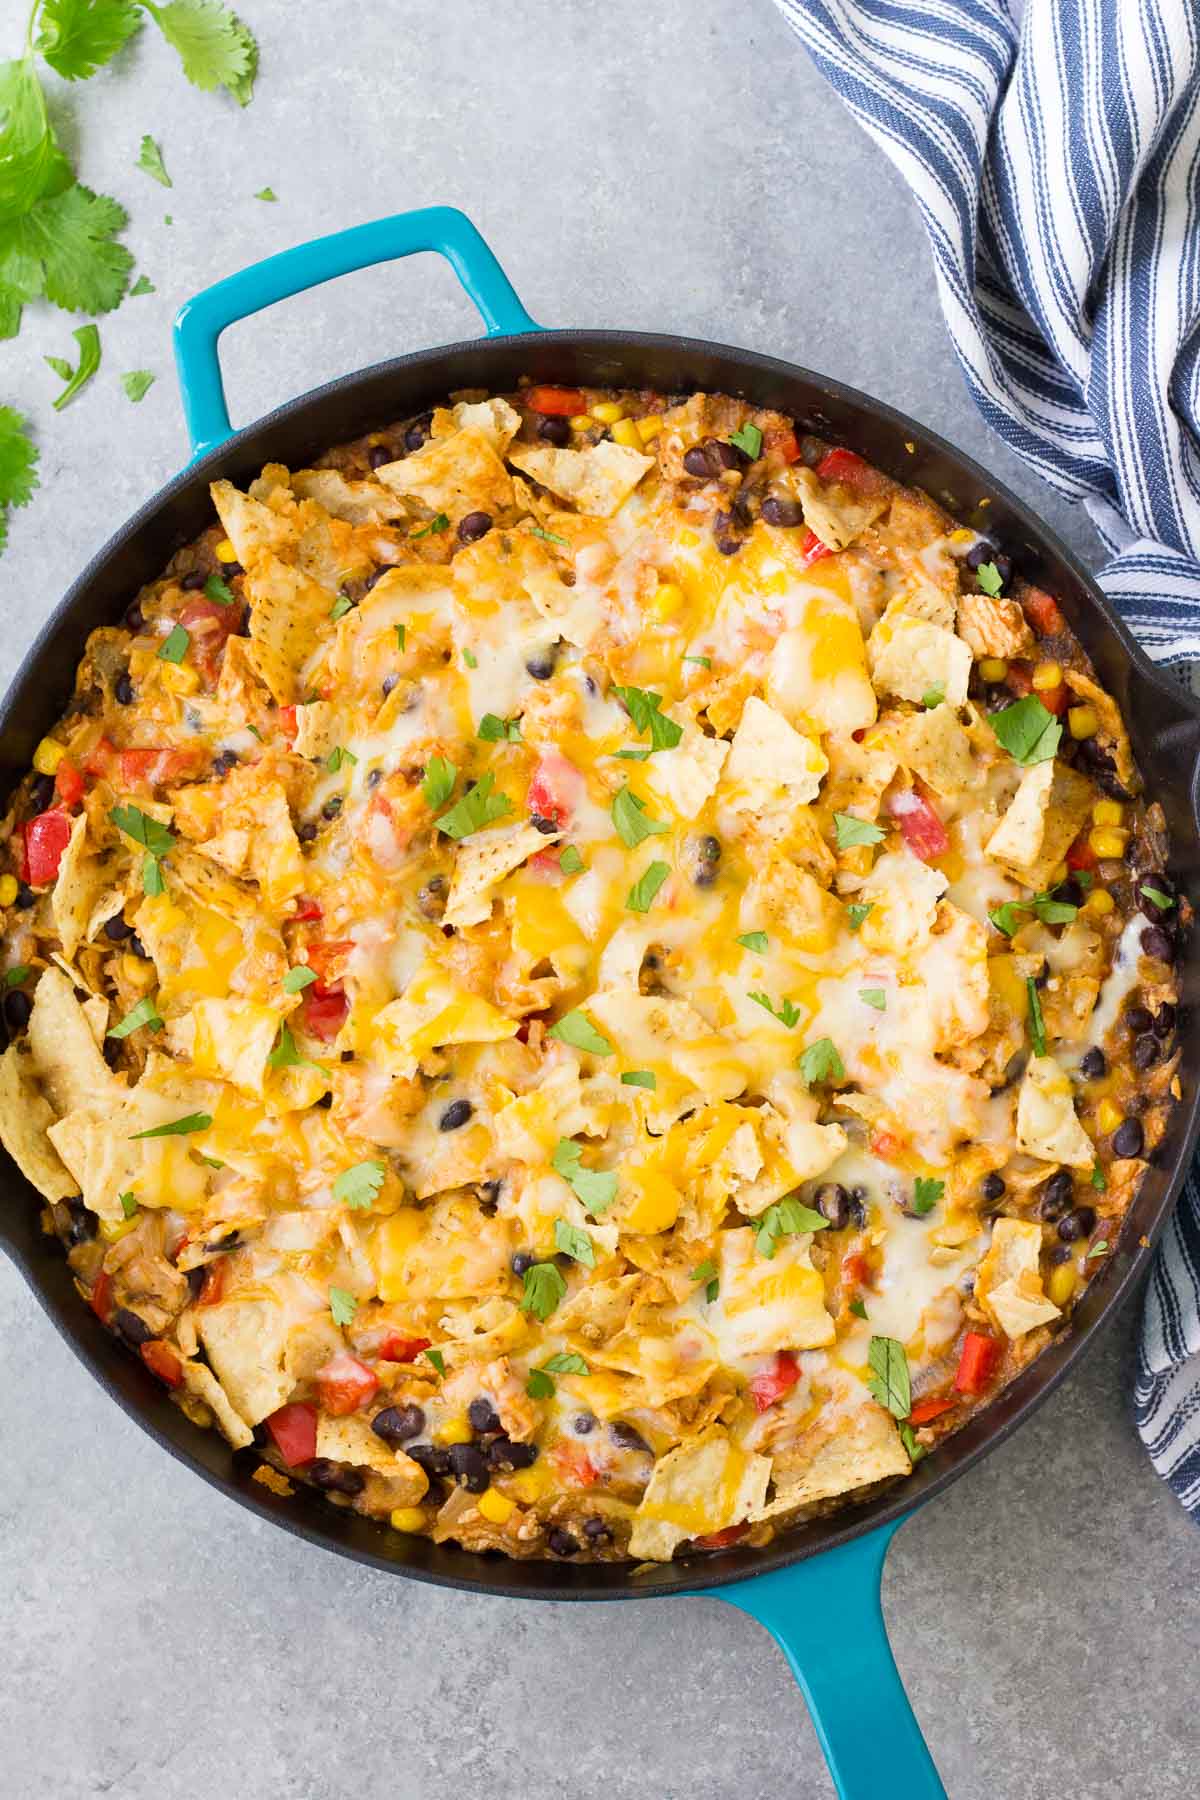 Overhead view of chicken tortilla casserole in a turquoise skillet.